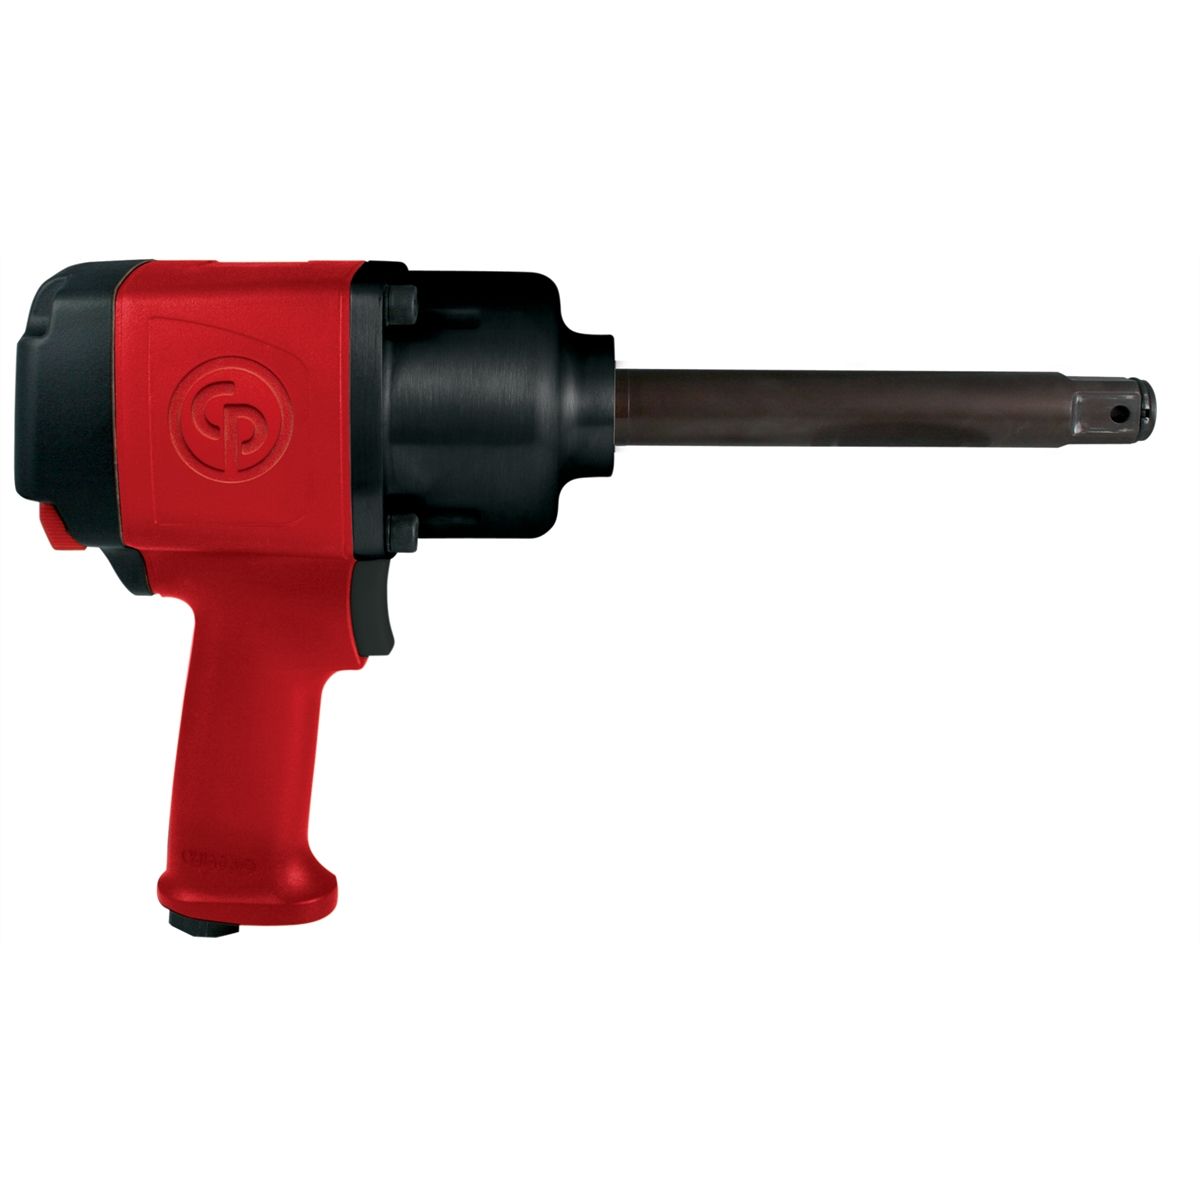 3/4" Inch Drive HD Air Impact Wrench - 1200 ft-lbsw 6 Inch Anvil